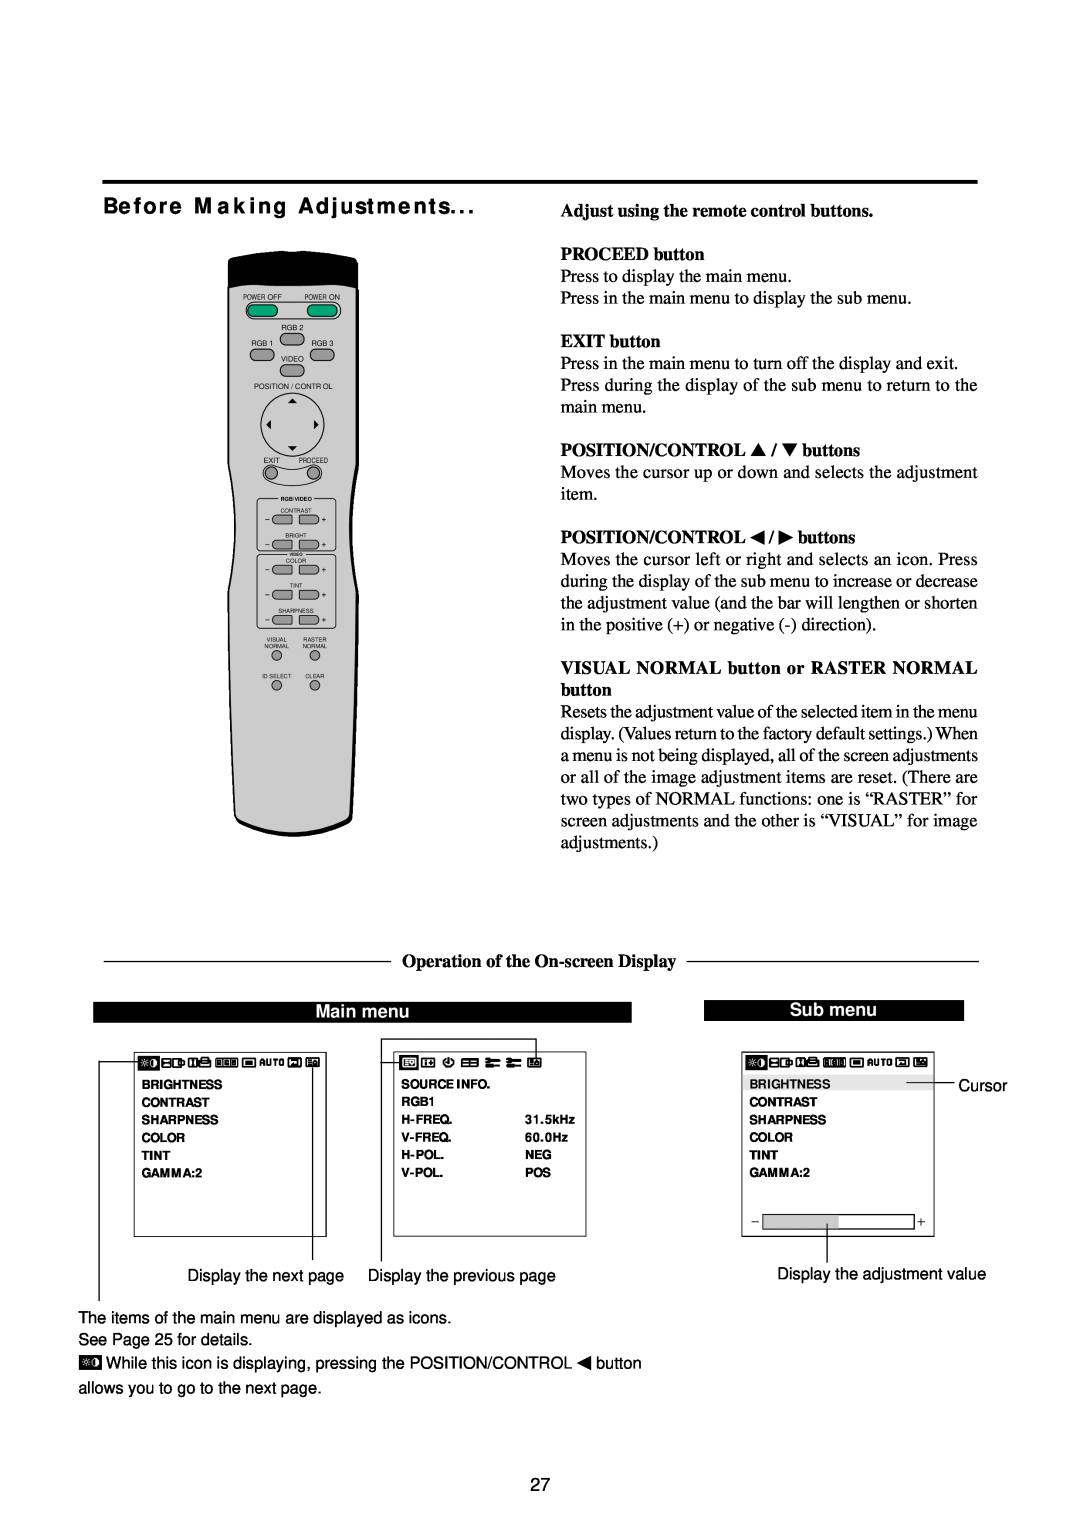 NEC 42PD2, 50PD1 Before Making Adjustments, Adjust using the remote control buttons PROCEED button, EXIT button, Main menu 